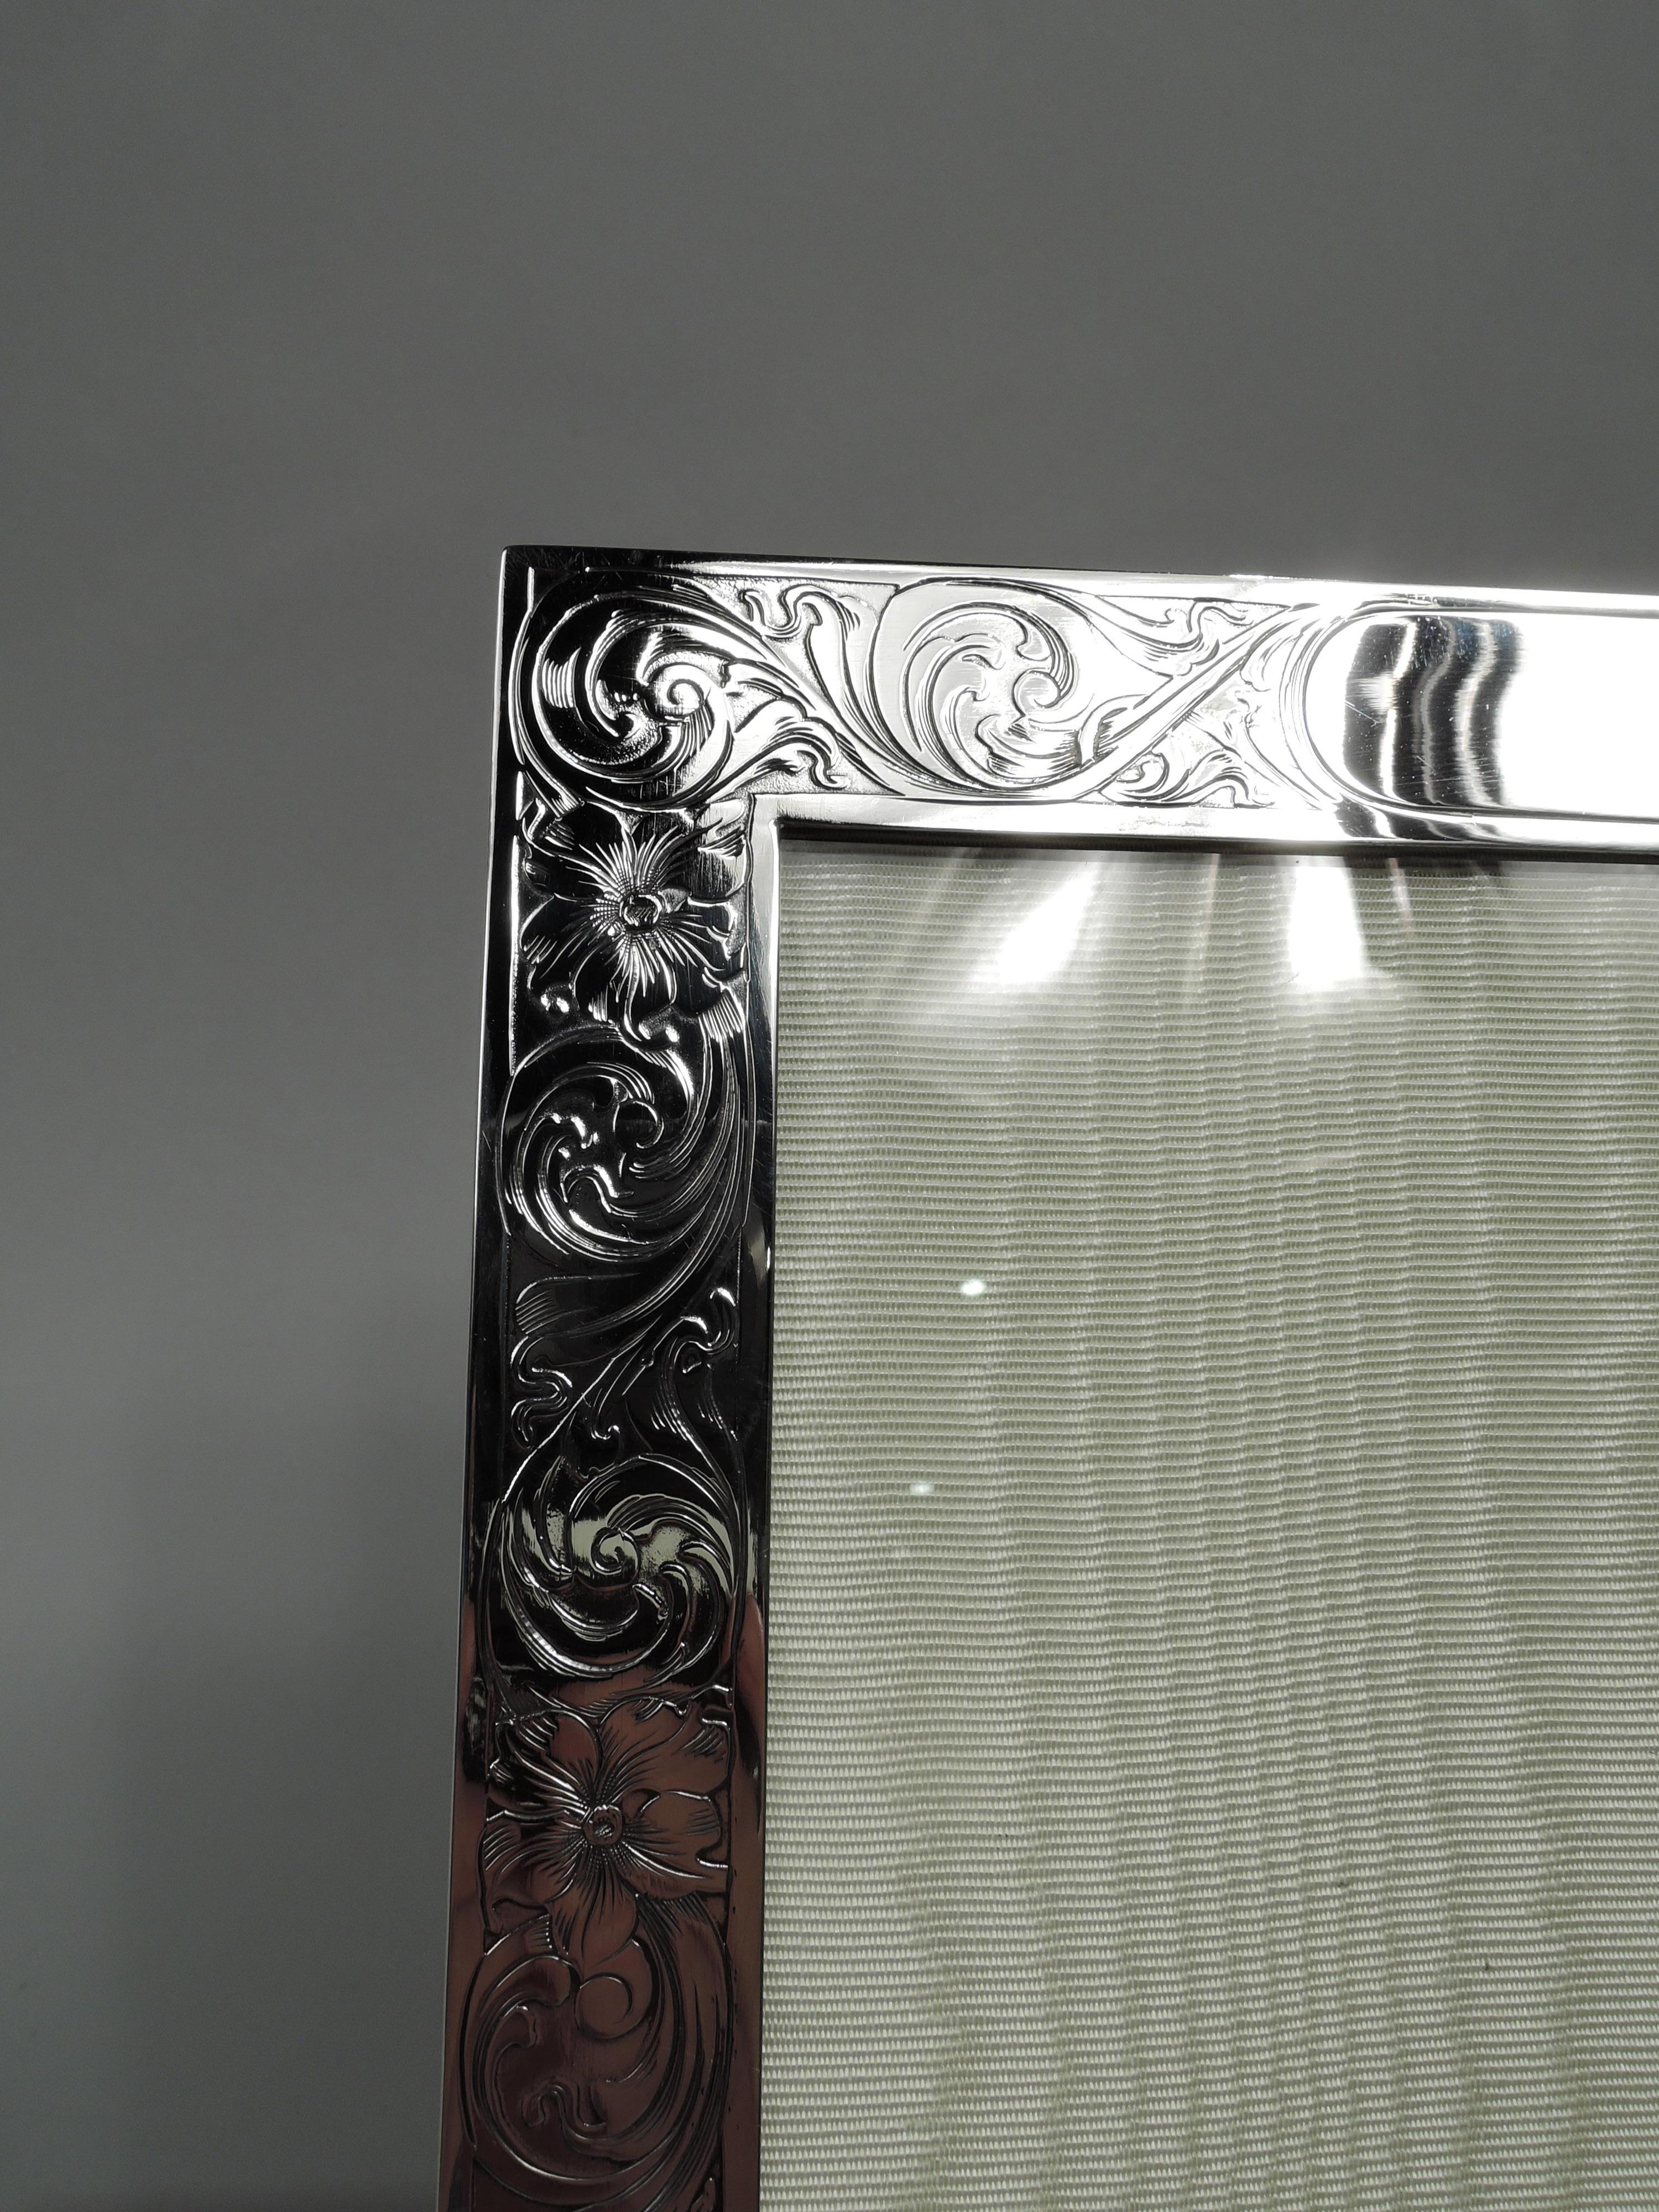 Art Nouveau sterling silver picture frame. Made by Mauser in New York, ca 1910. Rectangular window in flat surround with plain sides; front has acid-etched wraparound pattern with dense and fluid leafing scrolls and flower heads. Two corner ball